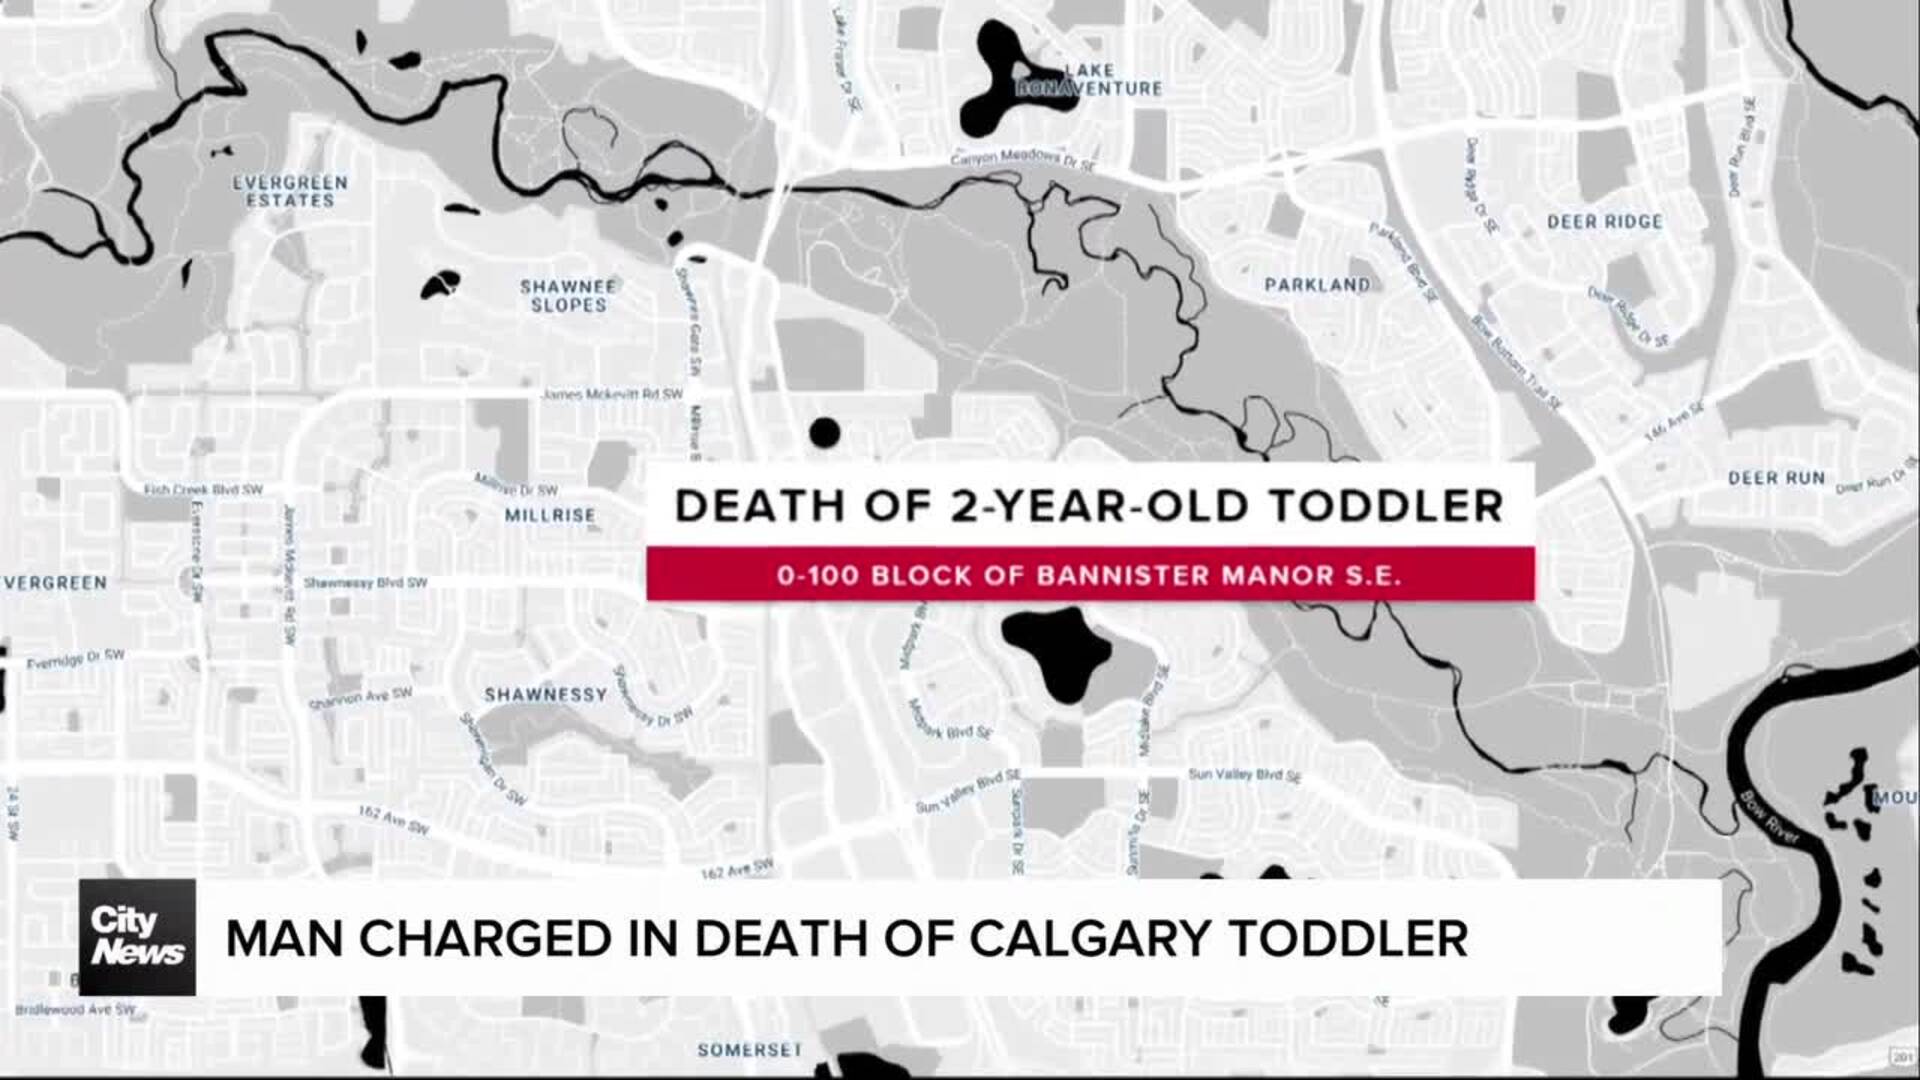 Man charged in death of Calgary toddler